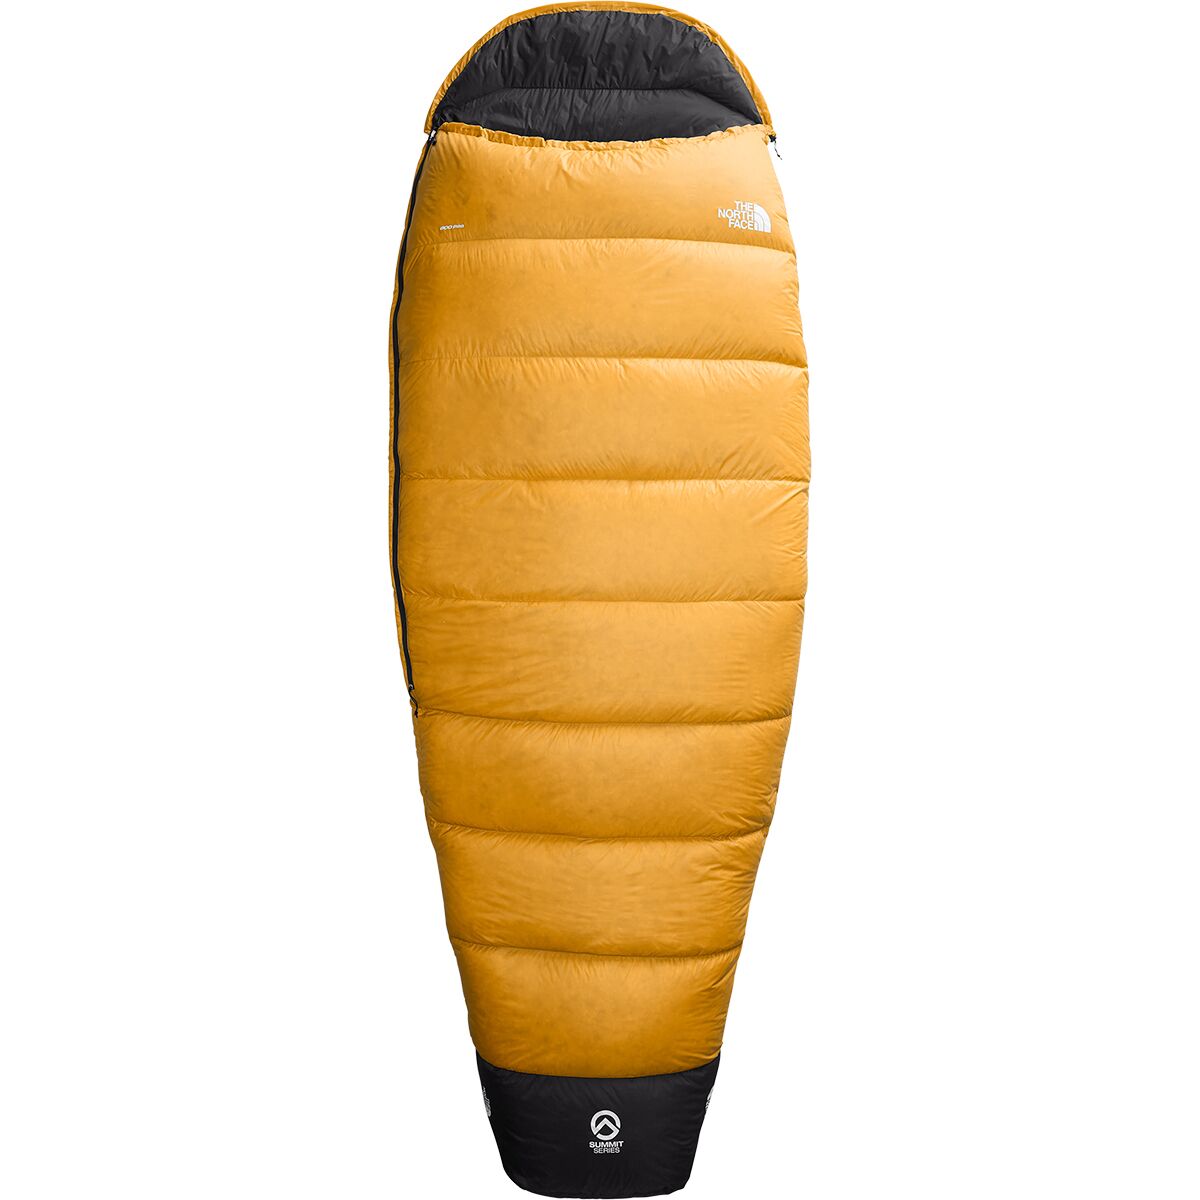 The North Face Inferno Sleeping Bag: 35F Down